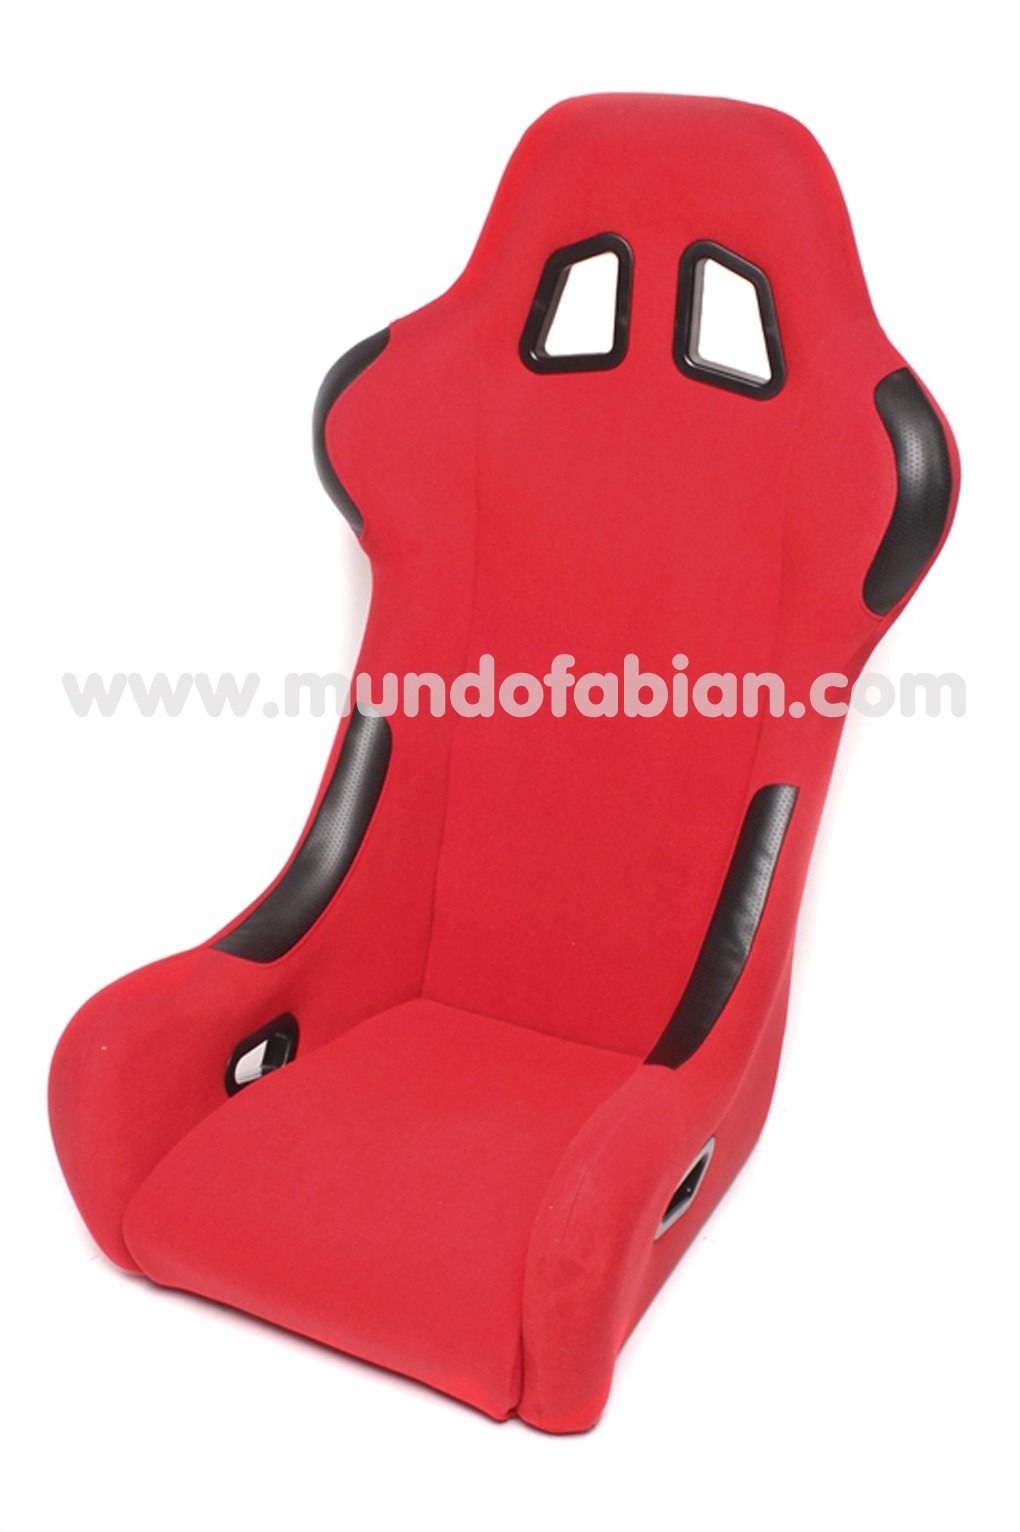 Asiento deportivo tipo backet